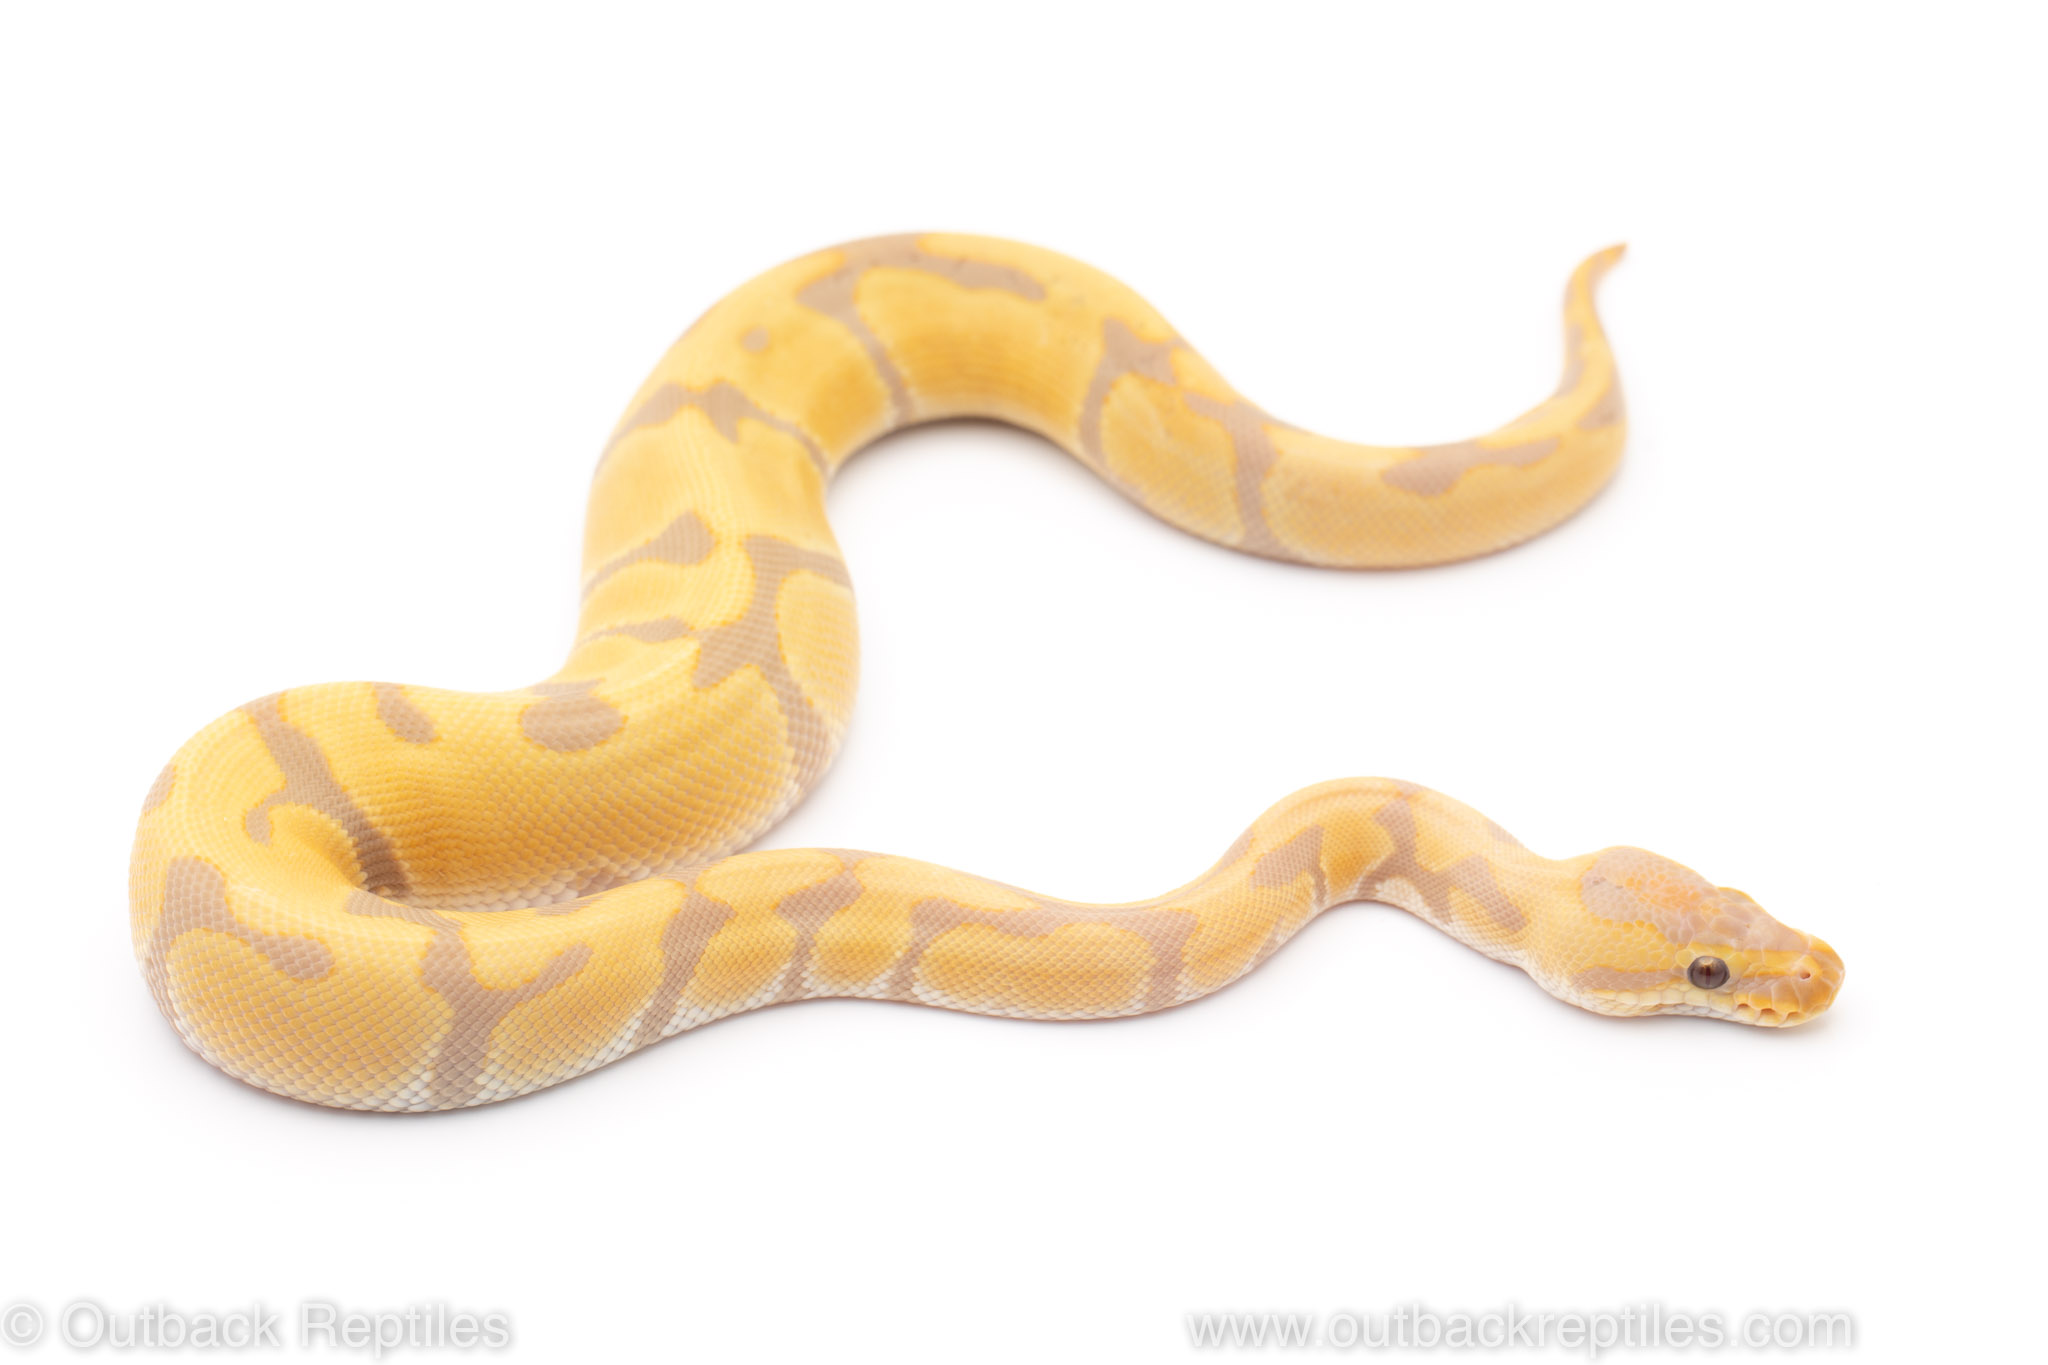 Super Enchi toffee/candy ball python for sale